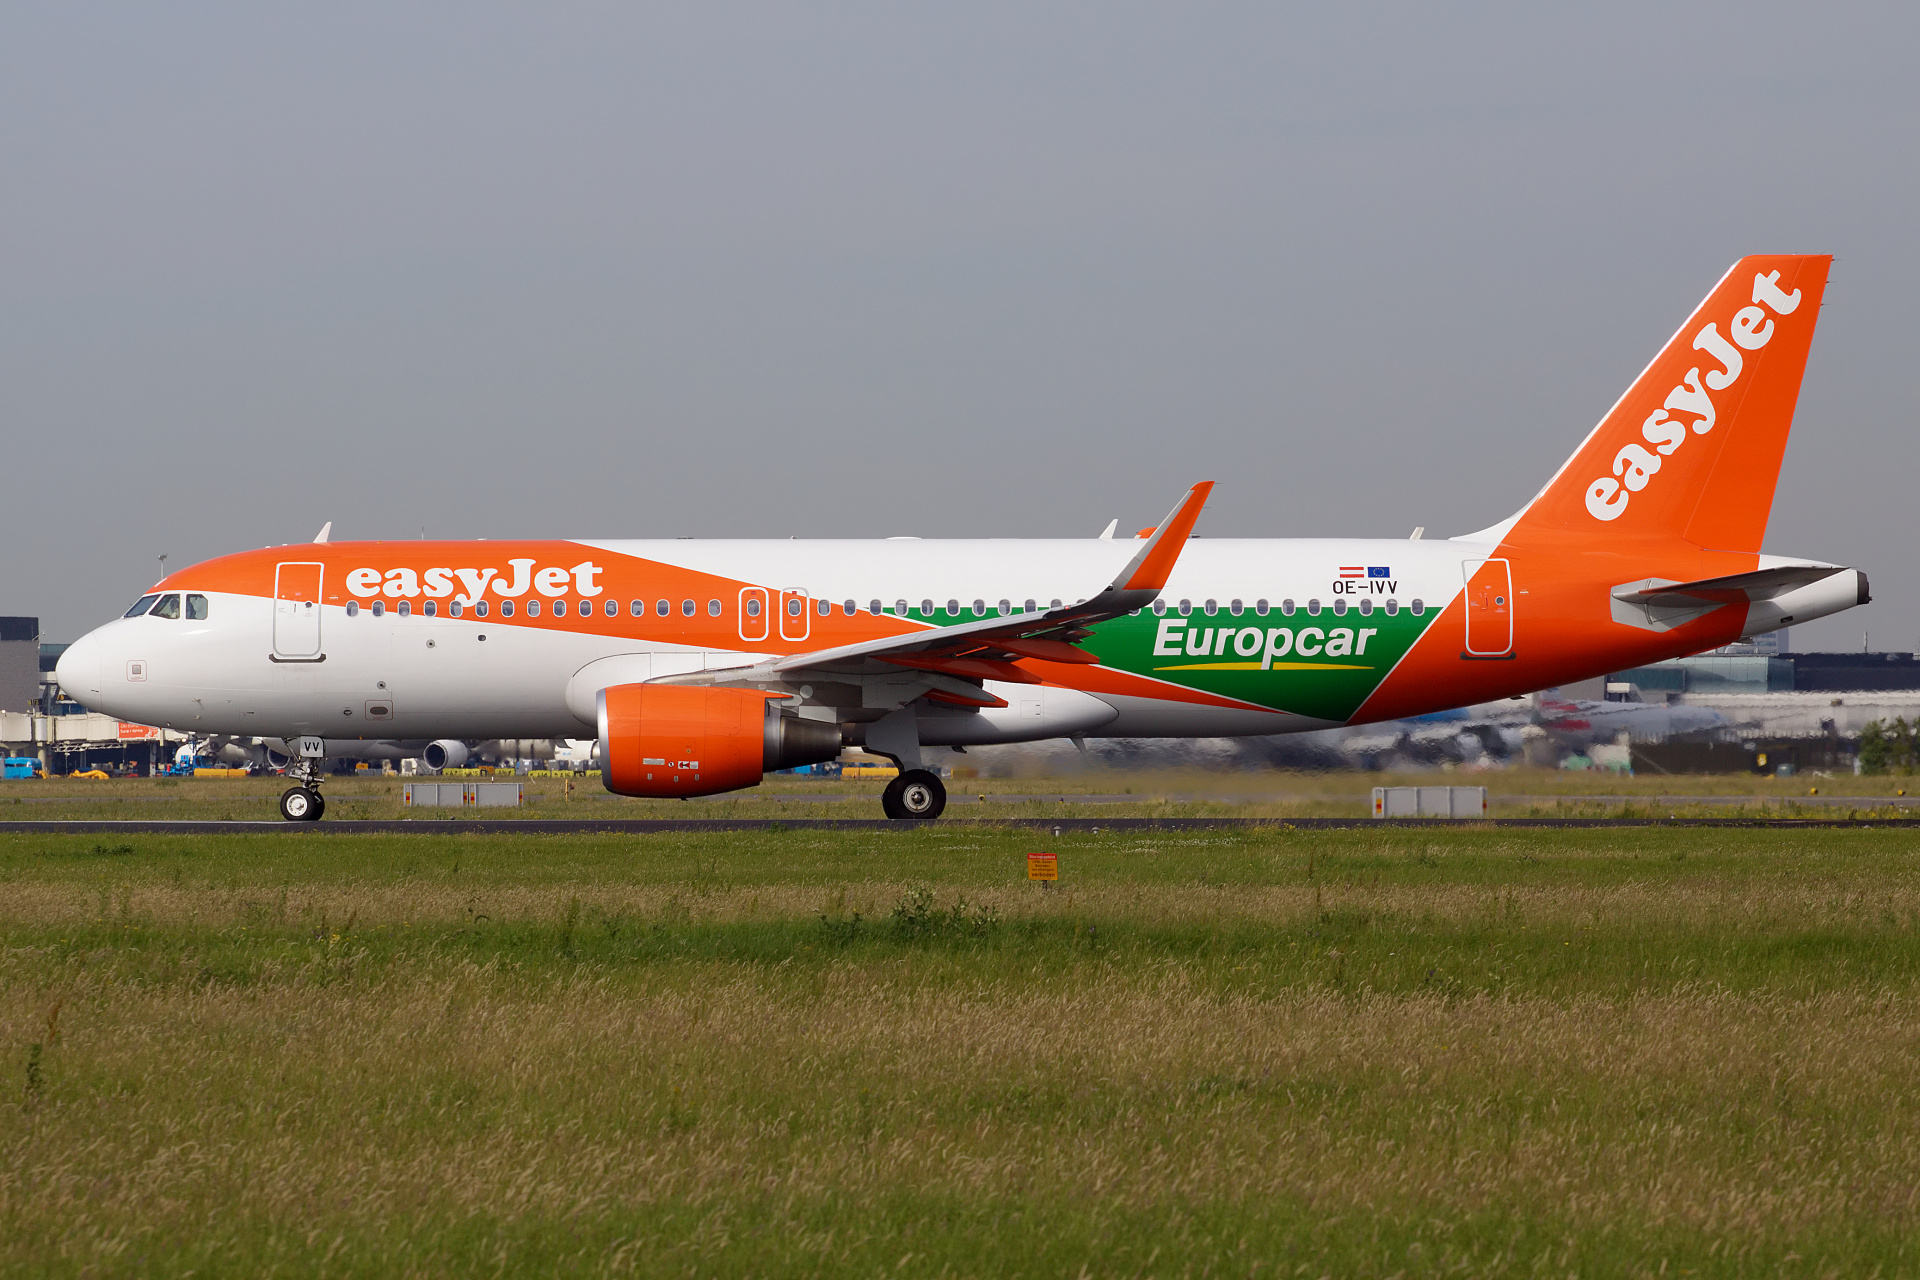 OE-IVV (Europcar livery) (Aircraft » Schiphol Spotting » Airbus A320-200 » EasyJet)